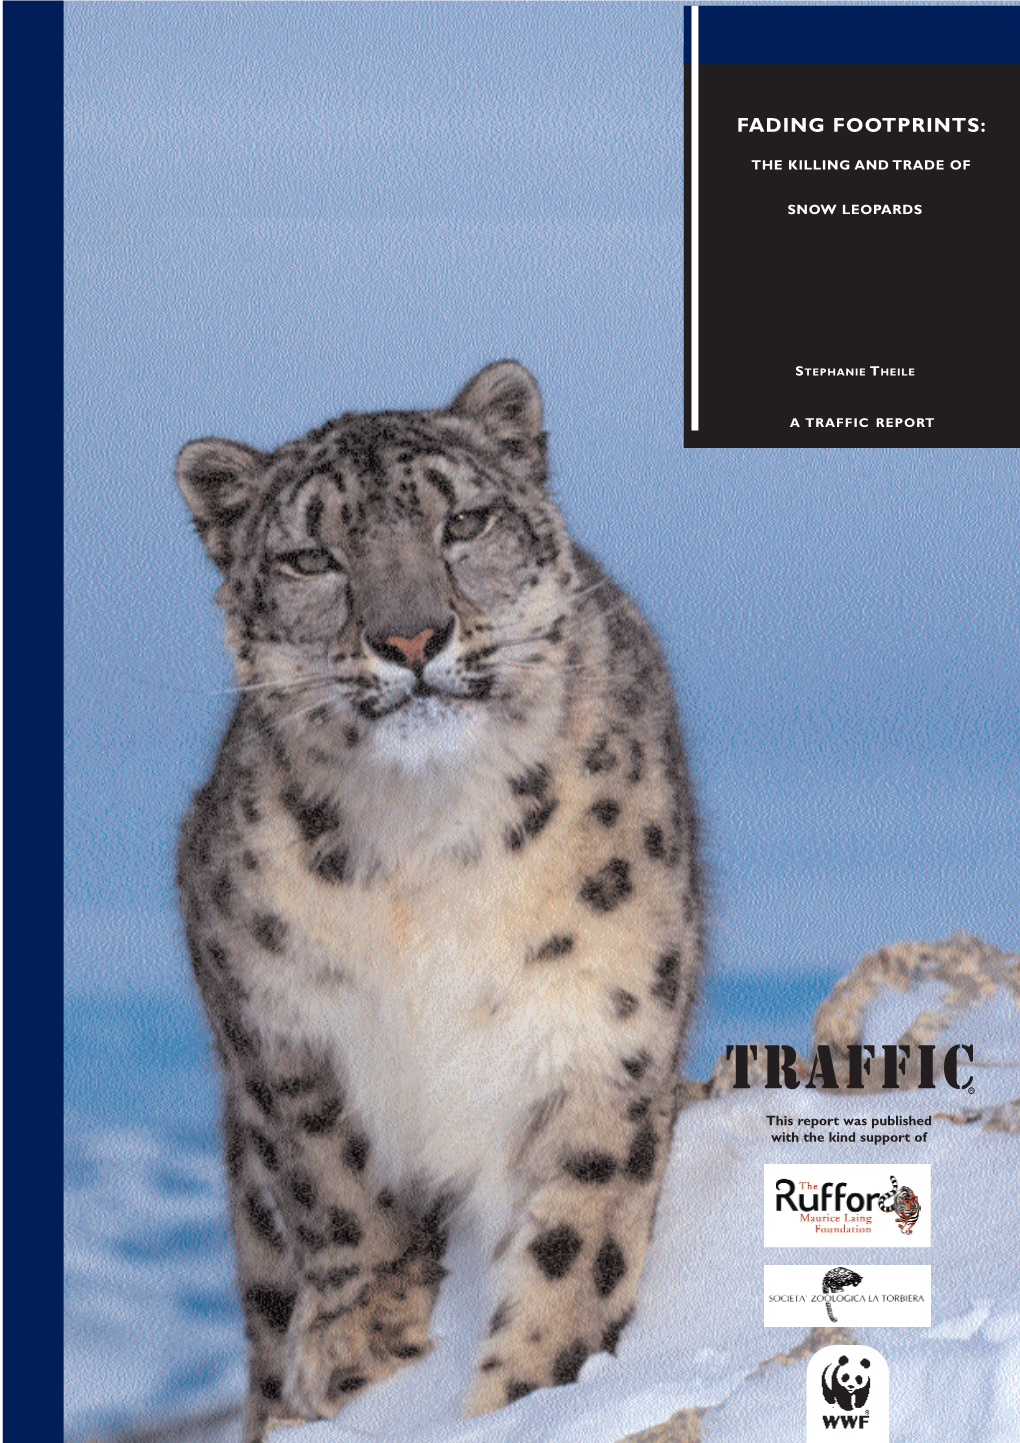 Fading Footprints: the Killing and Trade of Snow Leopards (PDF)